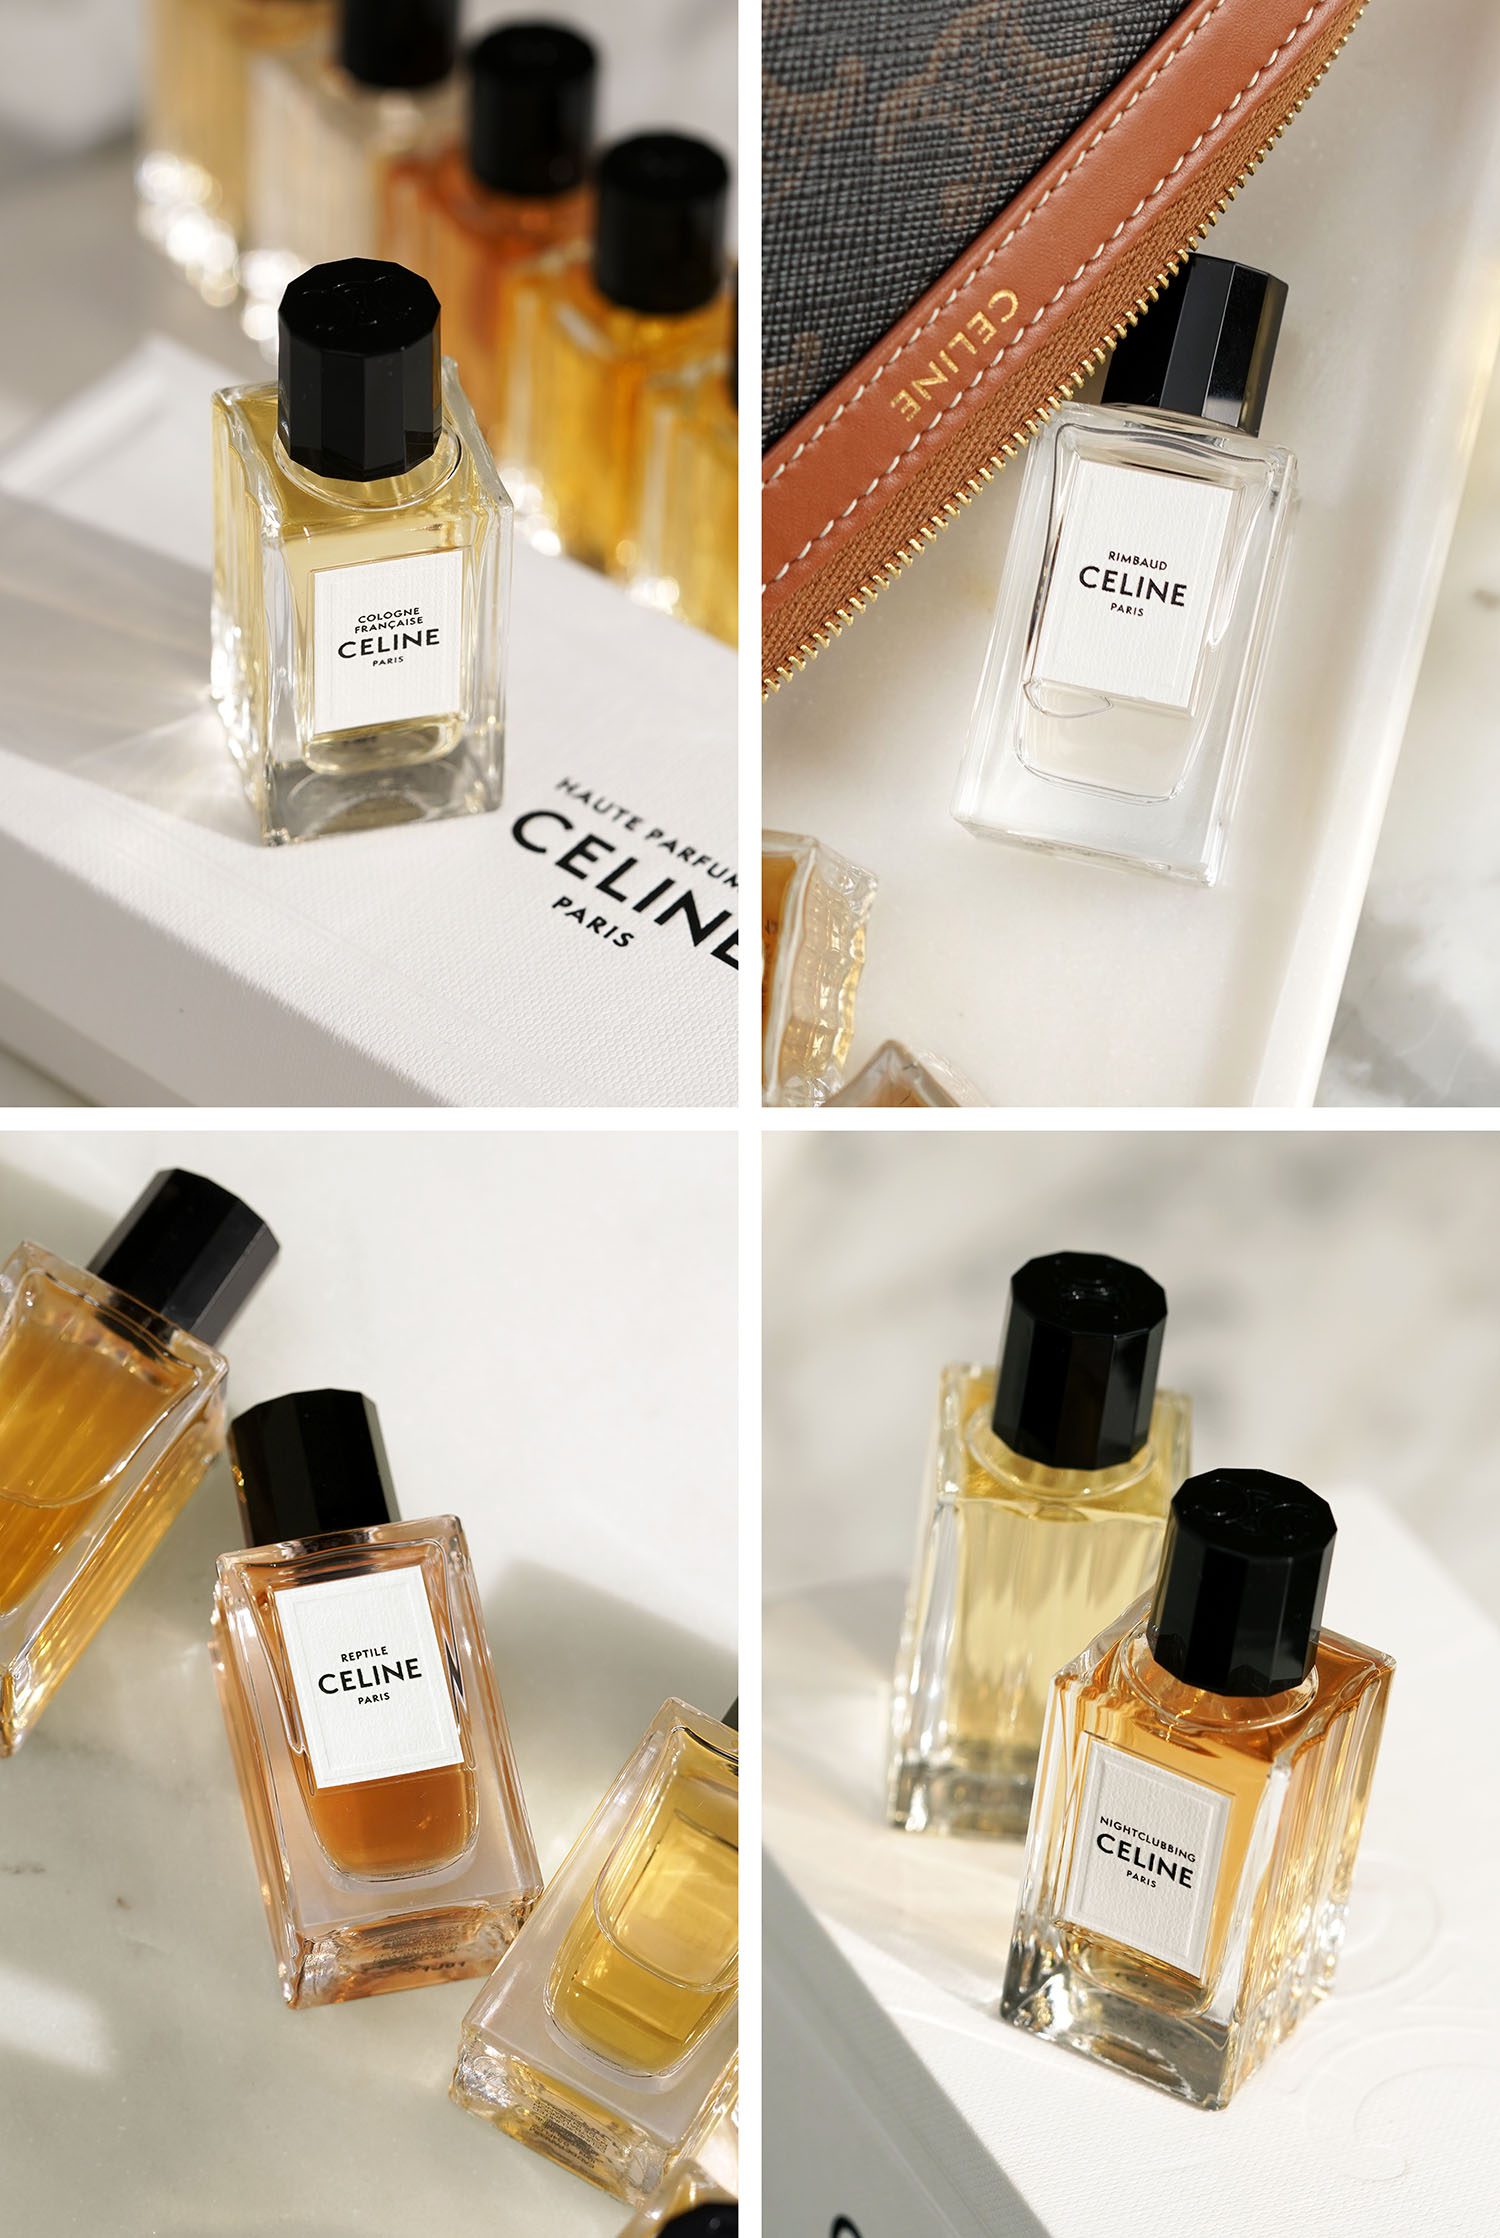 Collectively obsessed with scent: you have to see this mega mini perfume  collection! - The Perfume Society